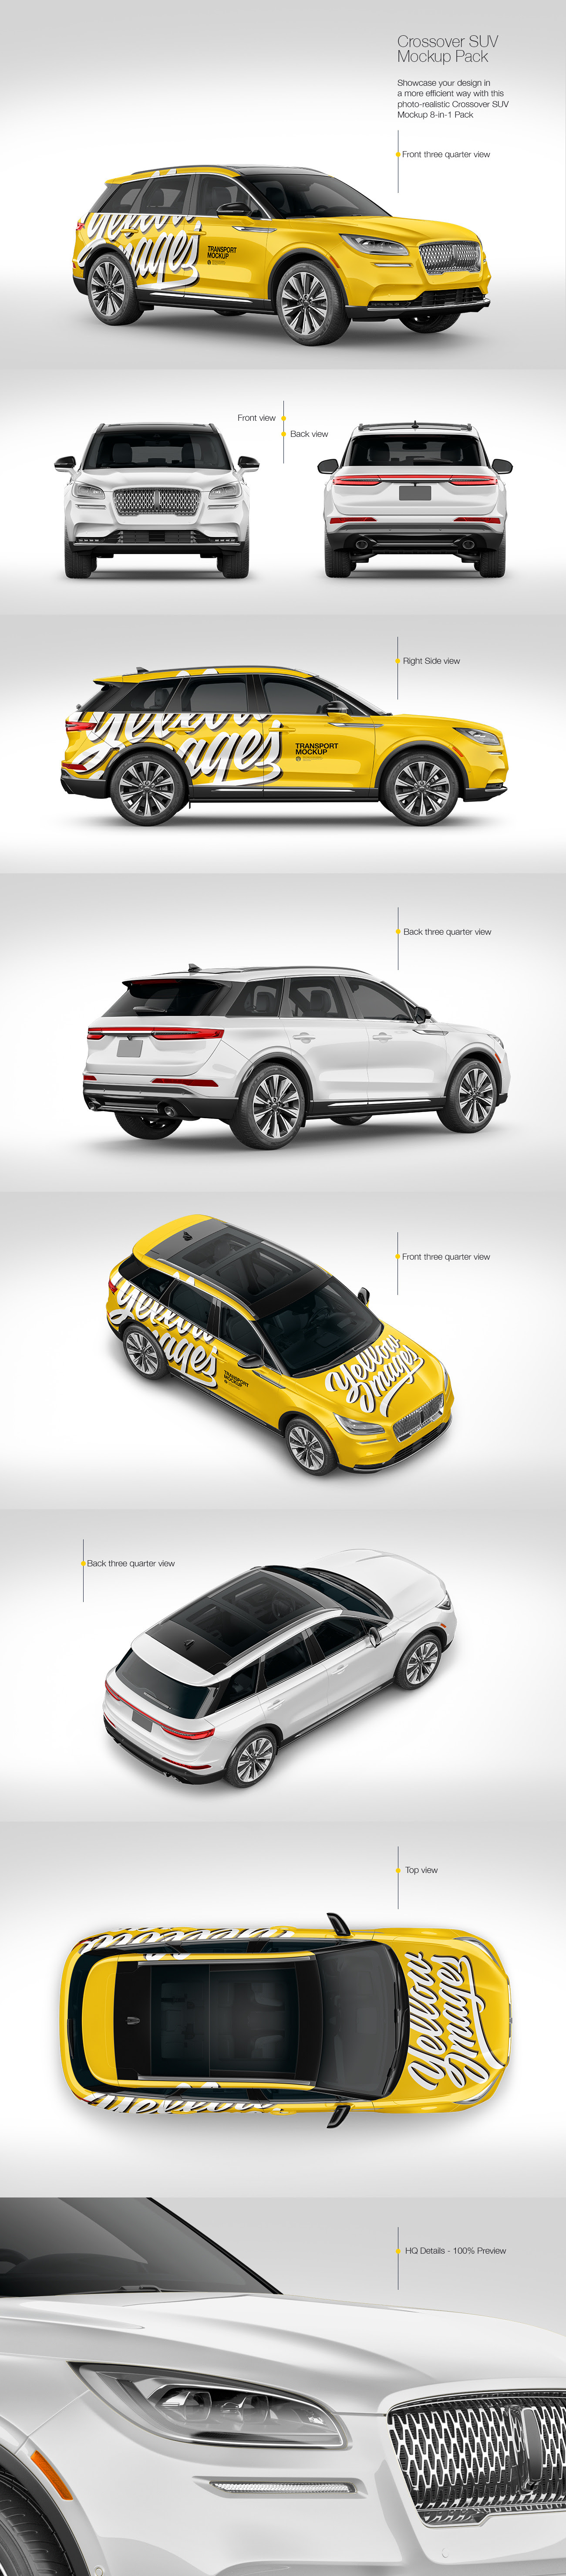 Crossover SUV Mockup Pack in Handpicked Sets of Vehicles on Yellow